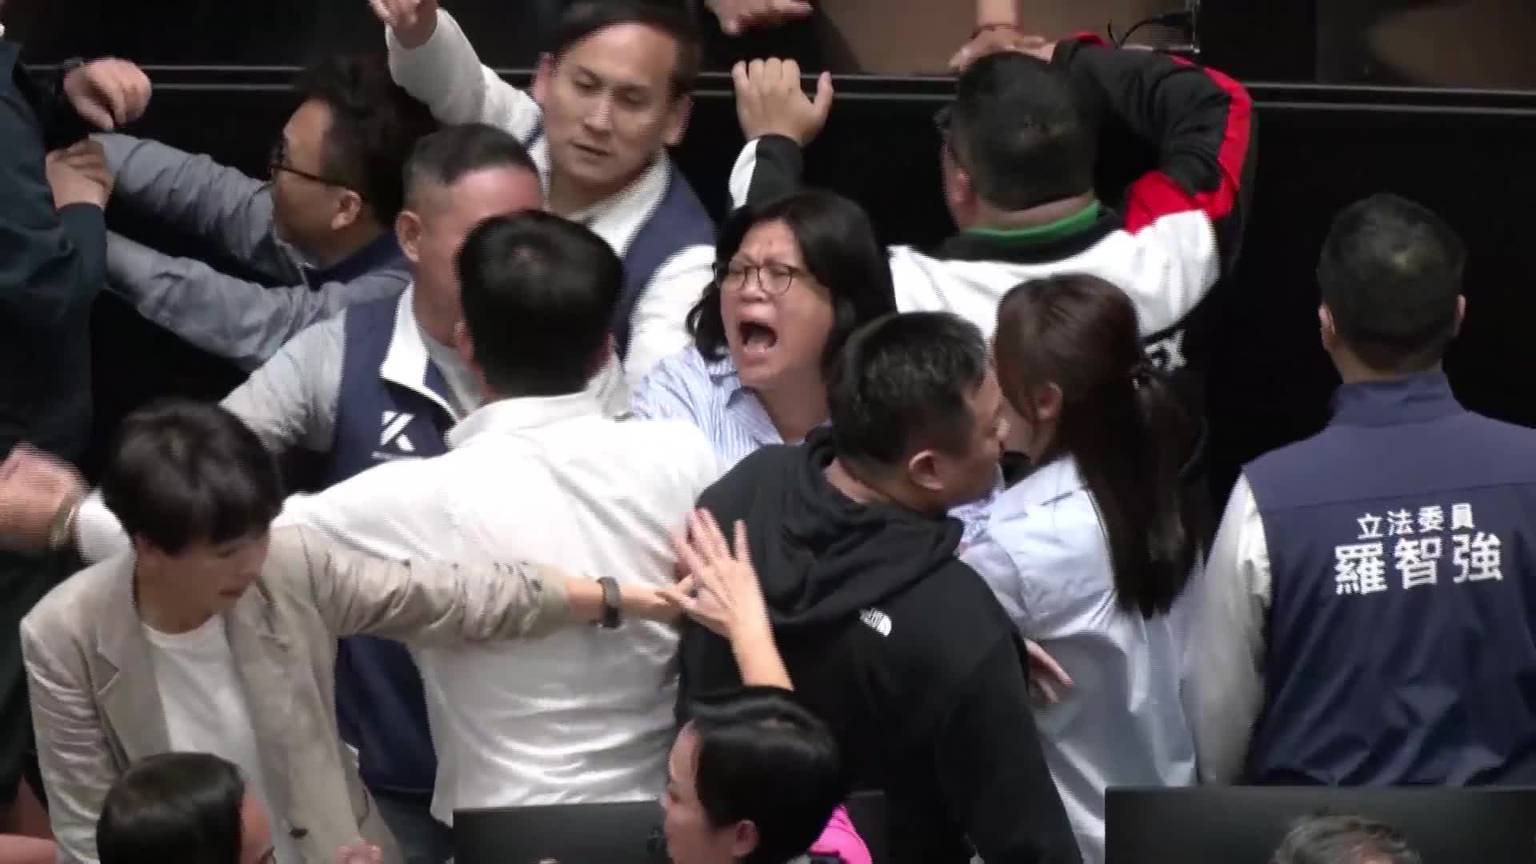 Video: Taiwan lawmakers brawl over parliamentary reforms [Video]